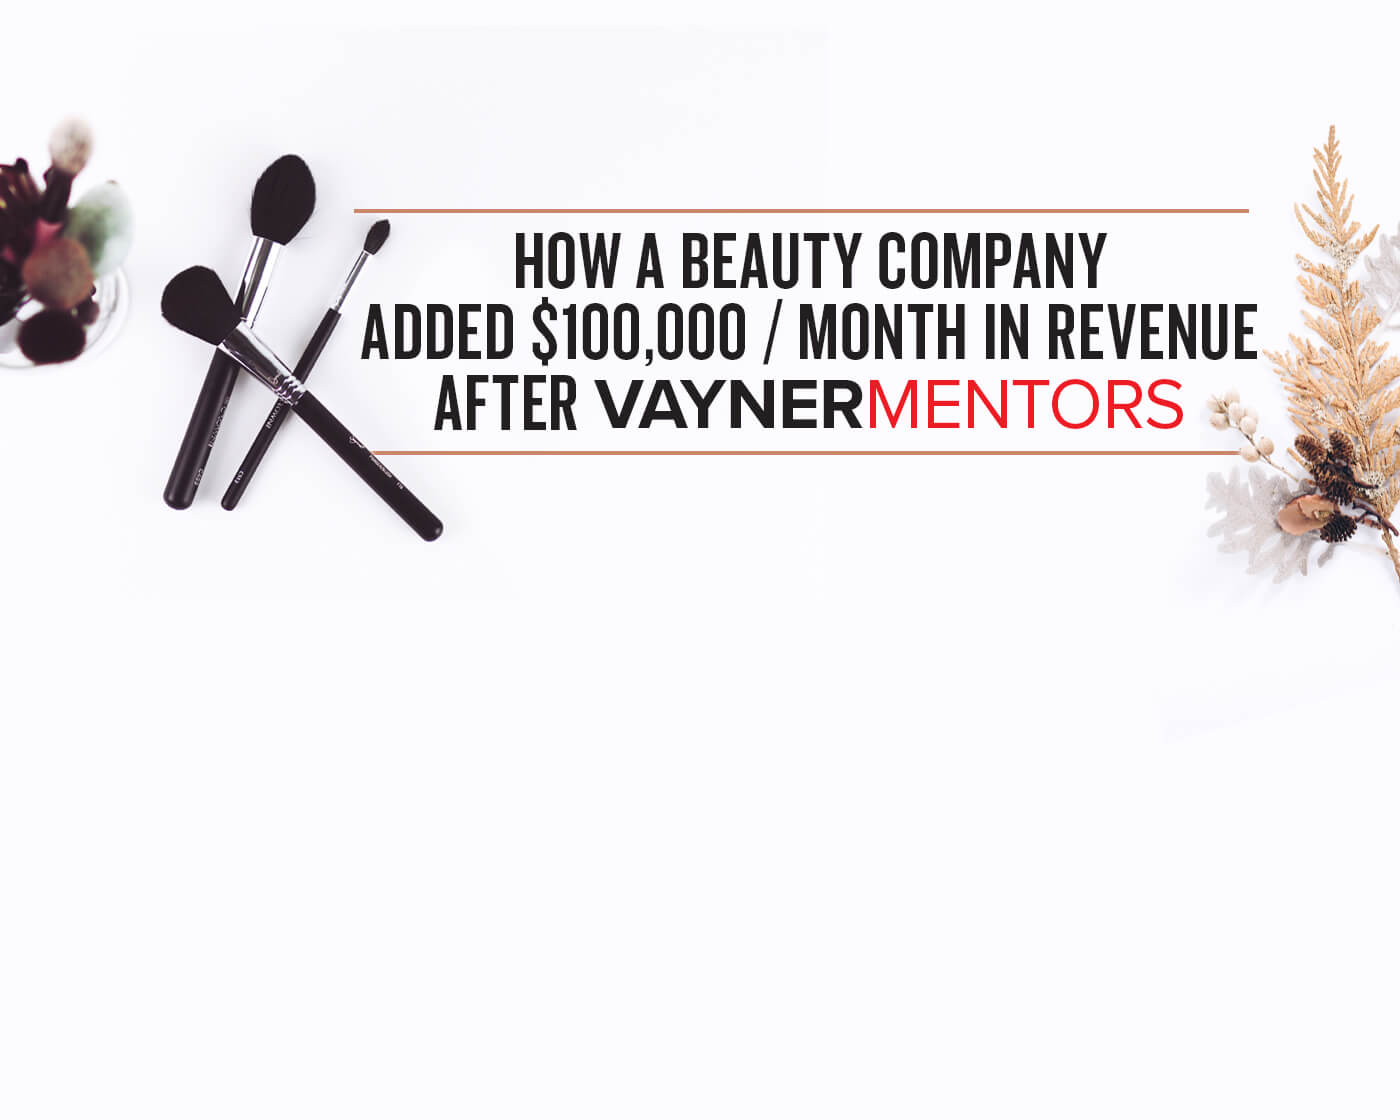 How a Beauty Company Added $100,000 / month in Revenue After VaynerMentors